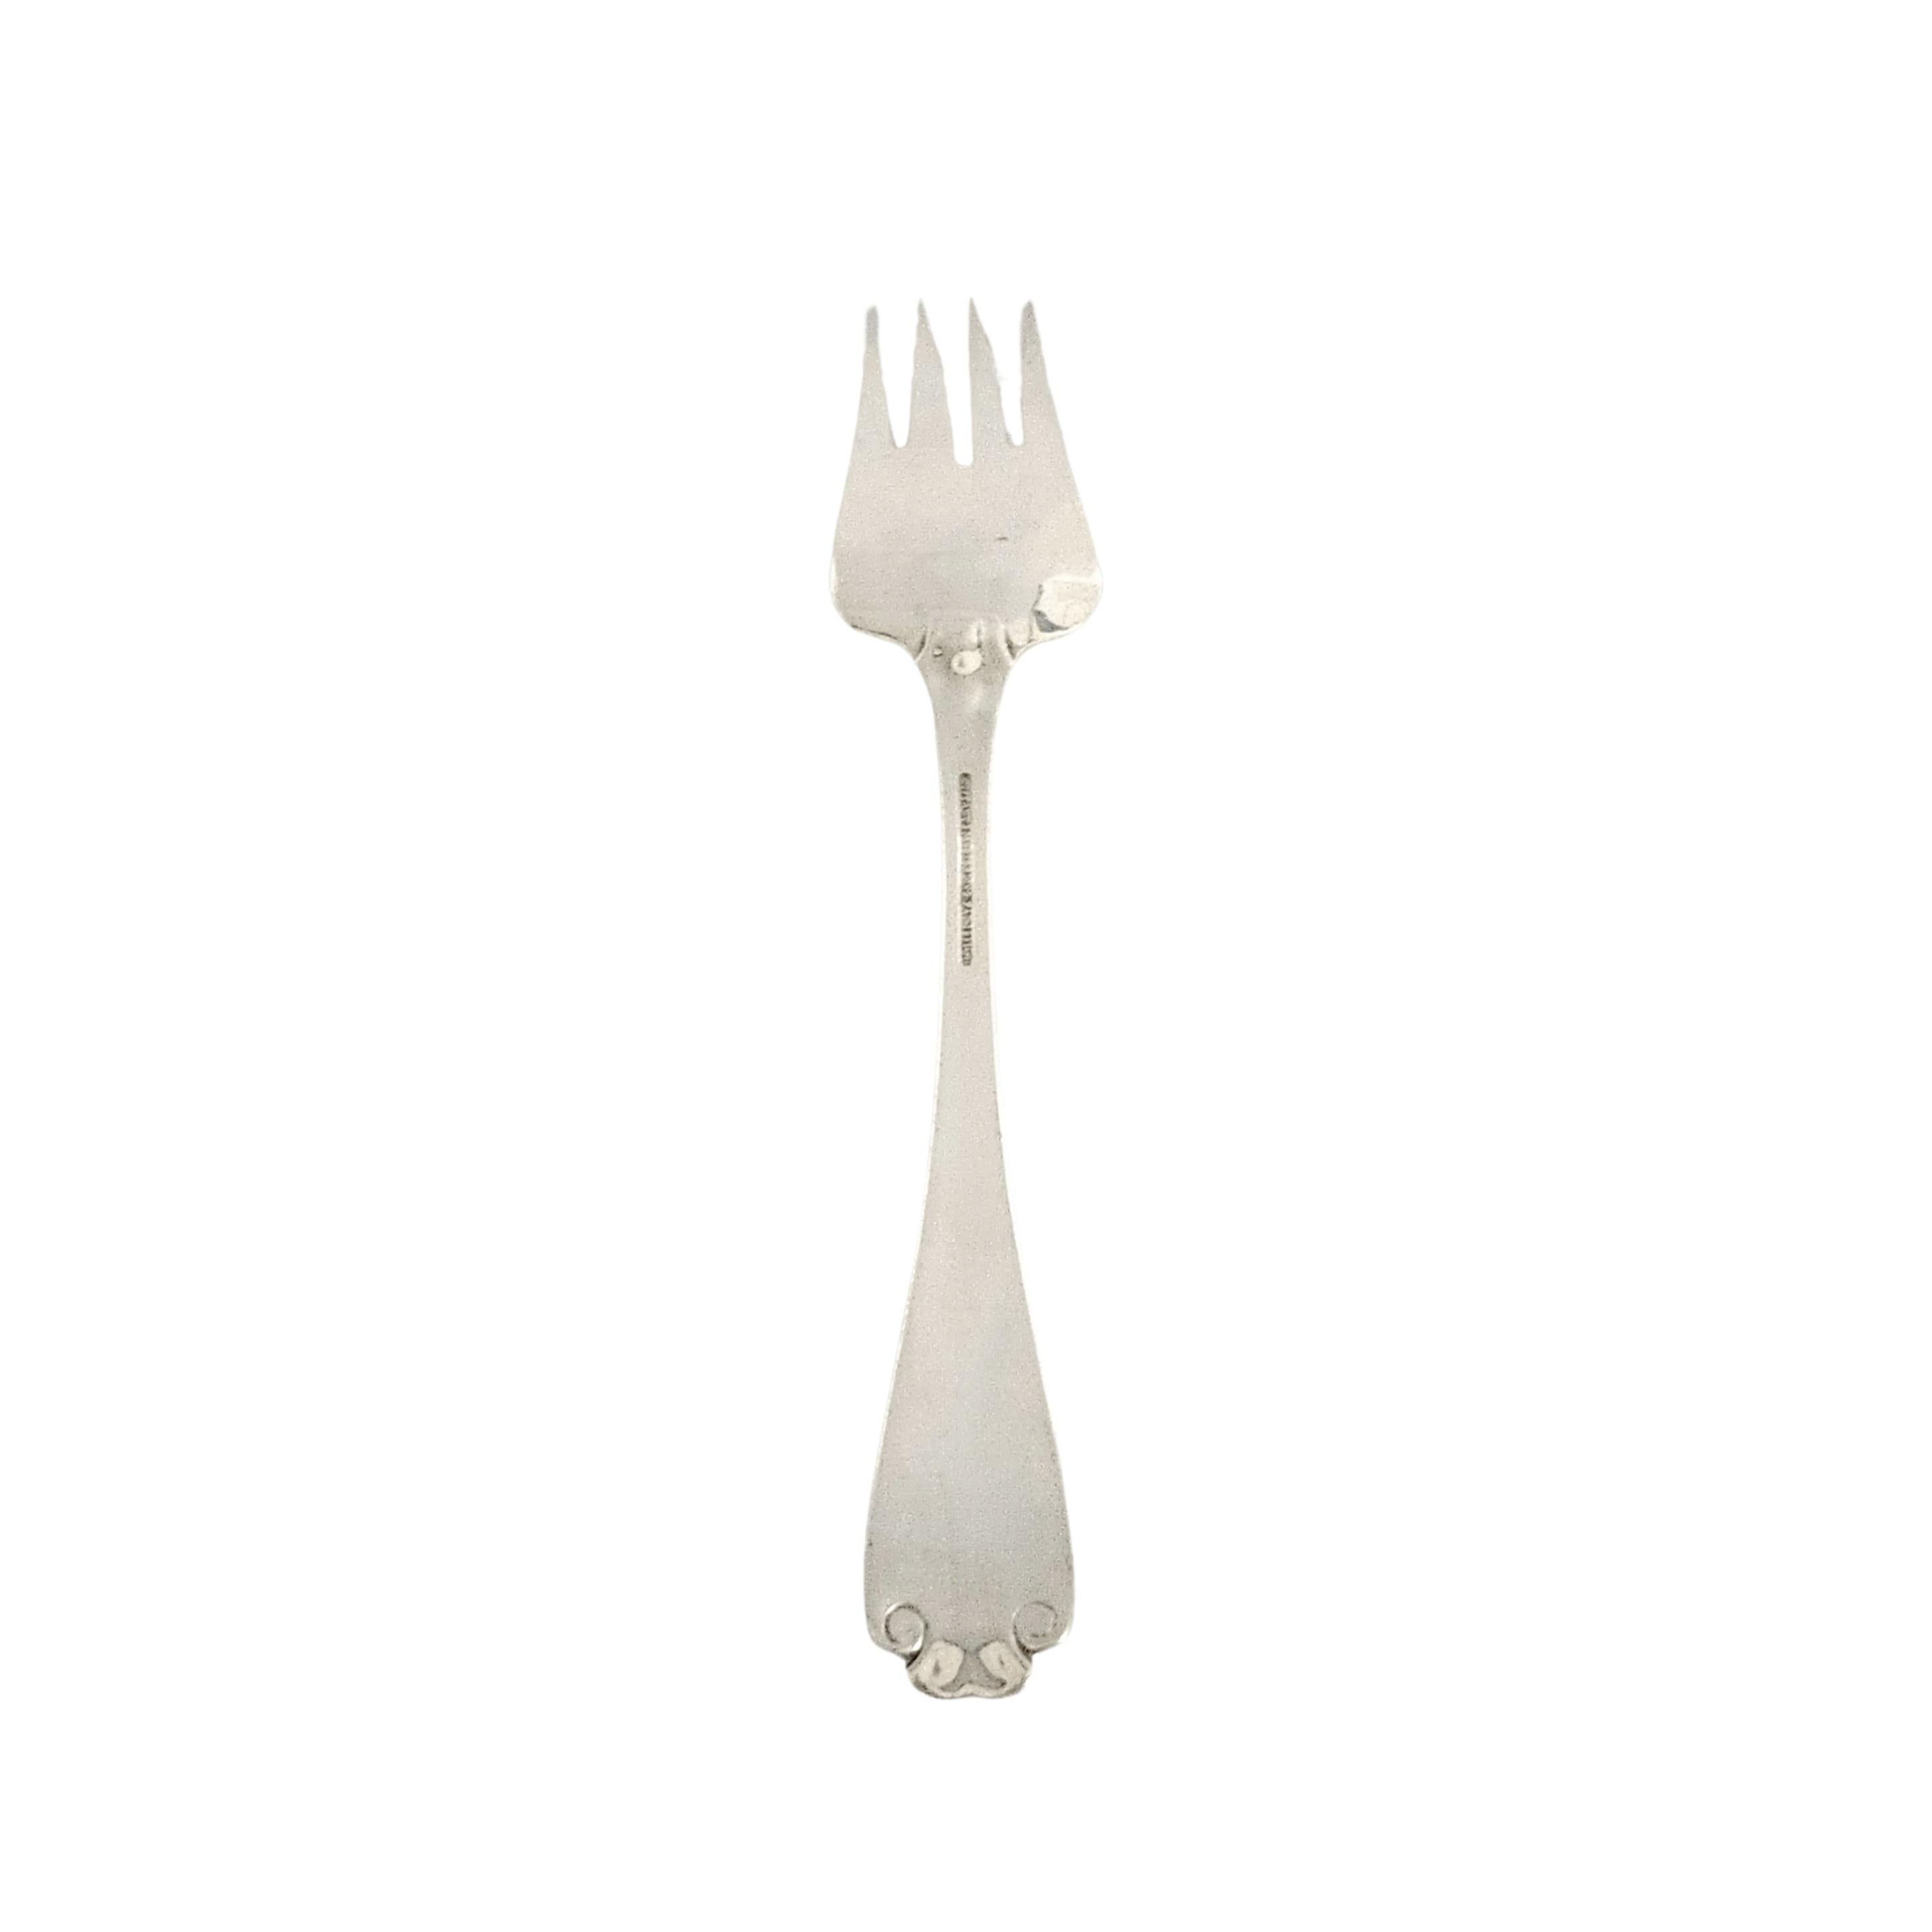 Sterling silver cold meat serving fork by Tiffany & Co in the Flemish pattern.

No monogram.

Beautiful heavy serving fork in the Flemish pattern, featuring a simple and elegant scroll design, making it a timeless classic that is still in demand